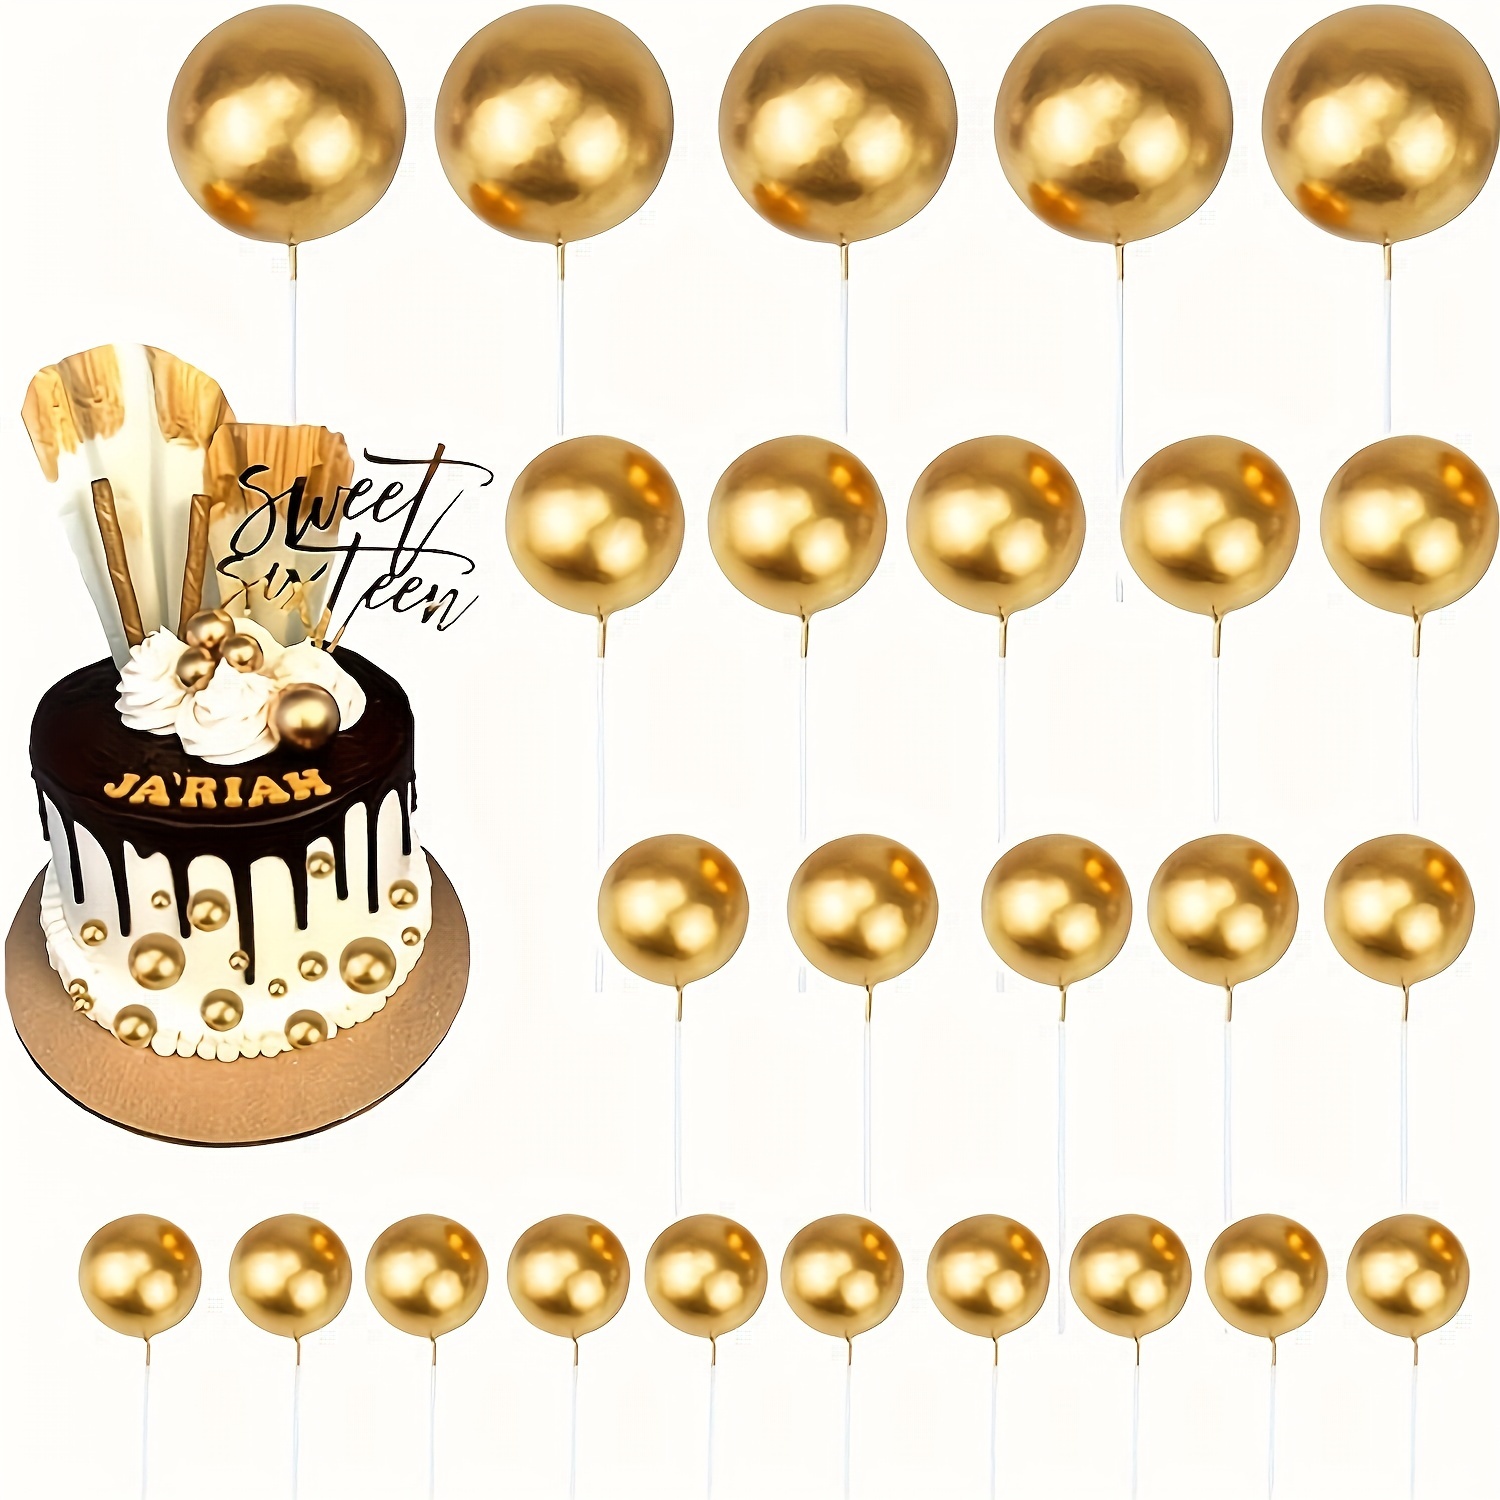 

25pcs, Ball Cake Topper, Ball Cake Insert Top Hat Pearl Ball Cake Pick Diy Cake Insert Top Hat Foam Ball Cupcake Top Hat Birthday Party Christmas Wedding Day Baby Shower Cake Decoration